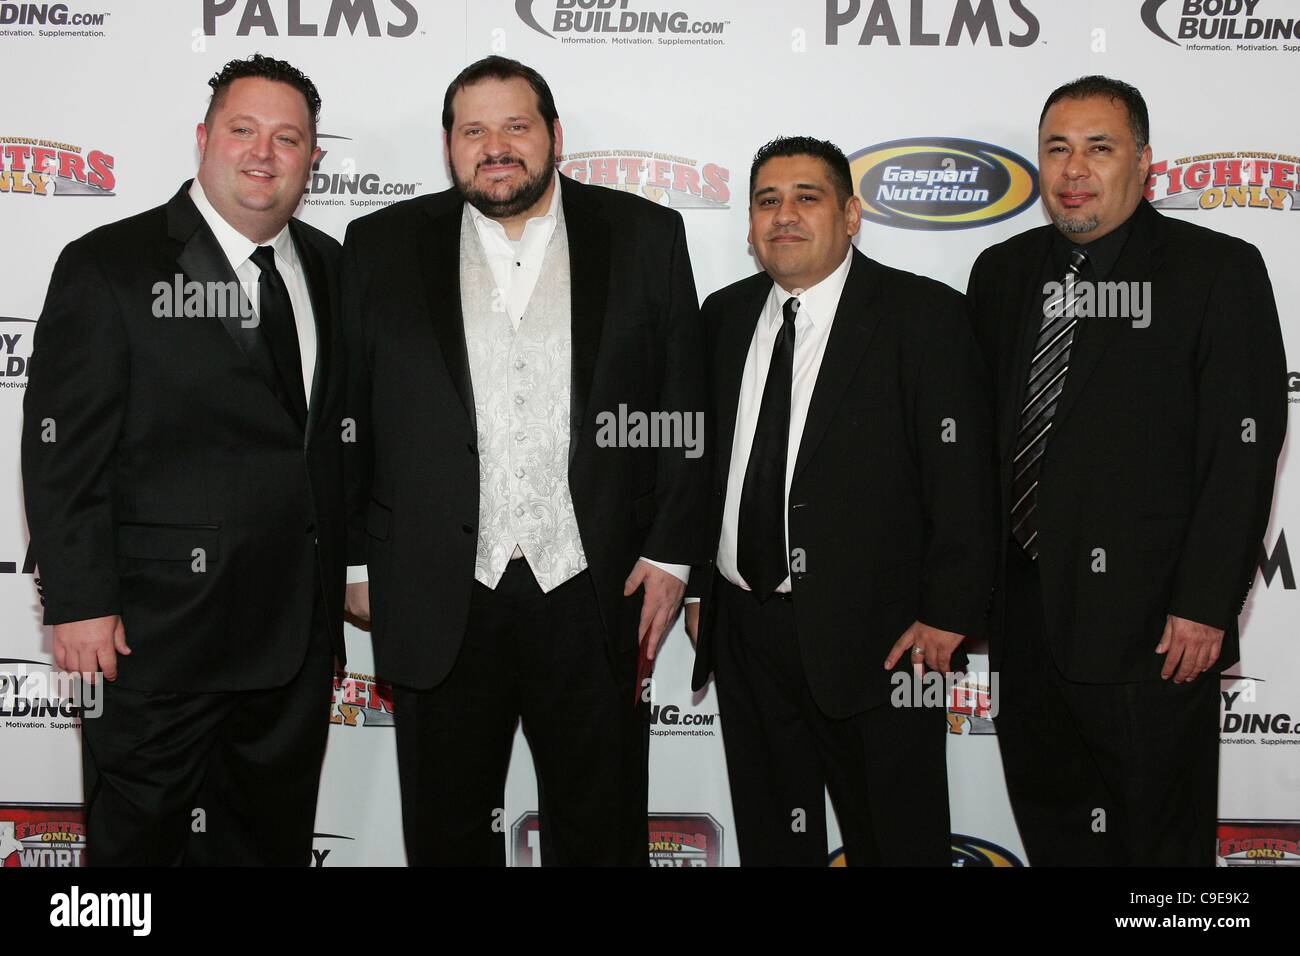 John Morgon, Dann Stupp, Brian Garcia, George Garcia of MMA Junkies in attendance for 4th Annual Fighters Only World Mixed Martial Arts (MMA) Awards, Palms Casino Resort Hotel, Las Vegas, NV November 30, 2011. Photo By: James Atoa/Everett Collection Stock Photo